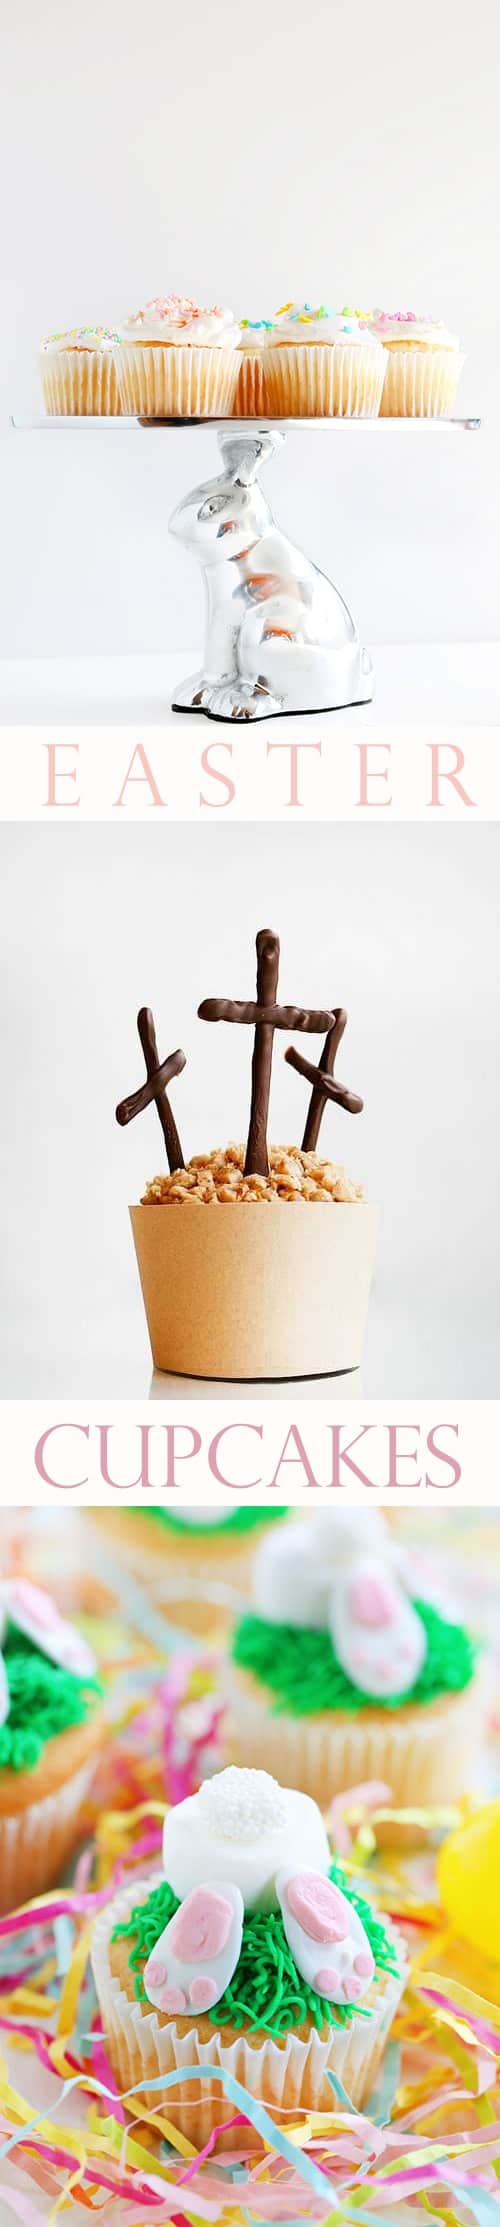 Simple but powerful cupcake ideas for this Easter!